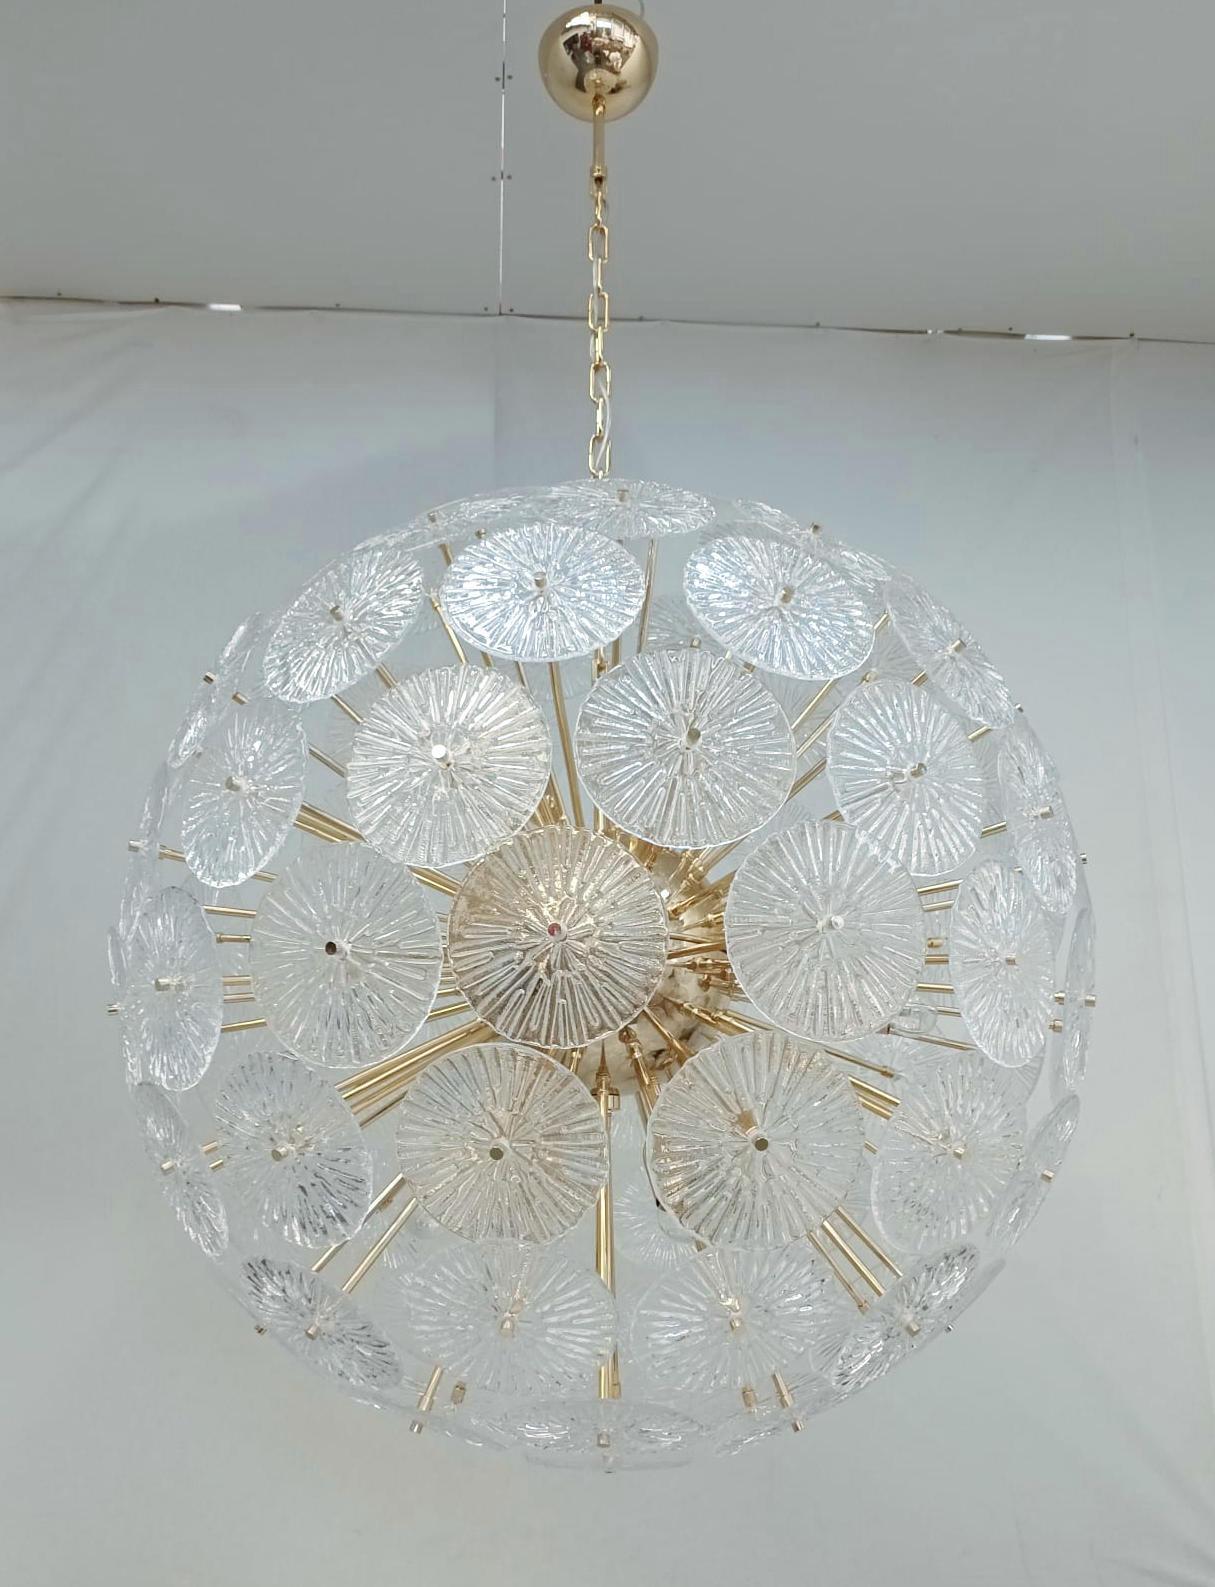 Italian sputnik chandelier with clear textured Murano glass discs, mounted on 24-karat gold-plated metal frame / designed by Fabio Bergomi for Fabio Ltd / Made in Italy
Measures: Diameter 35.5 inches, height 35.5 inches, total height 59 inches